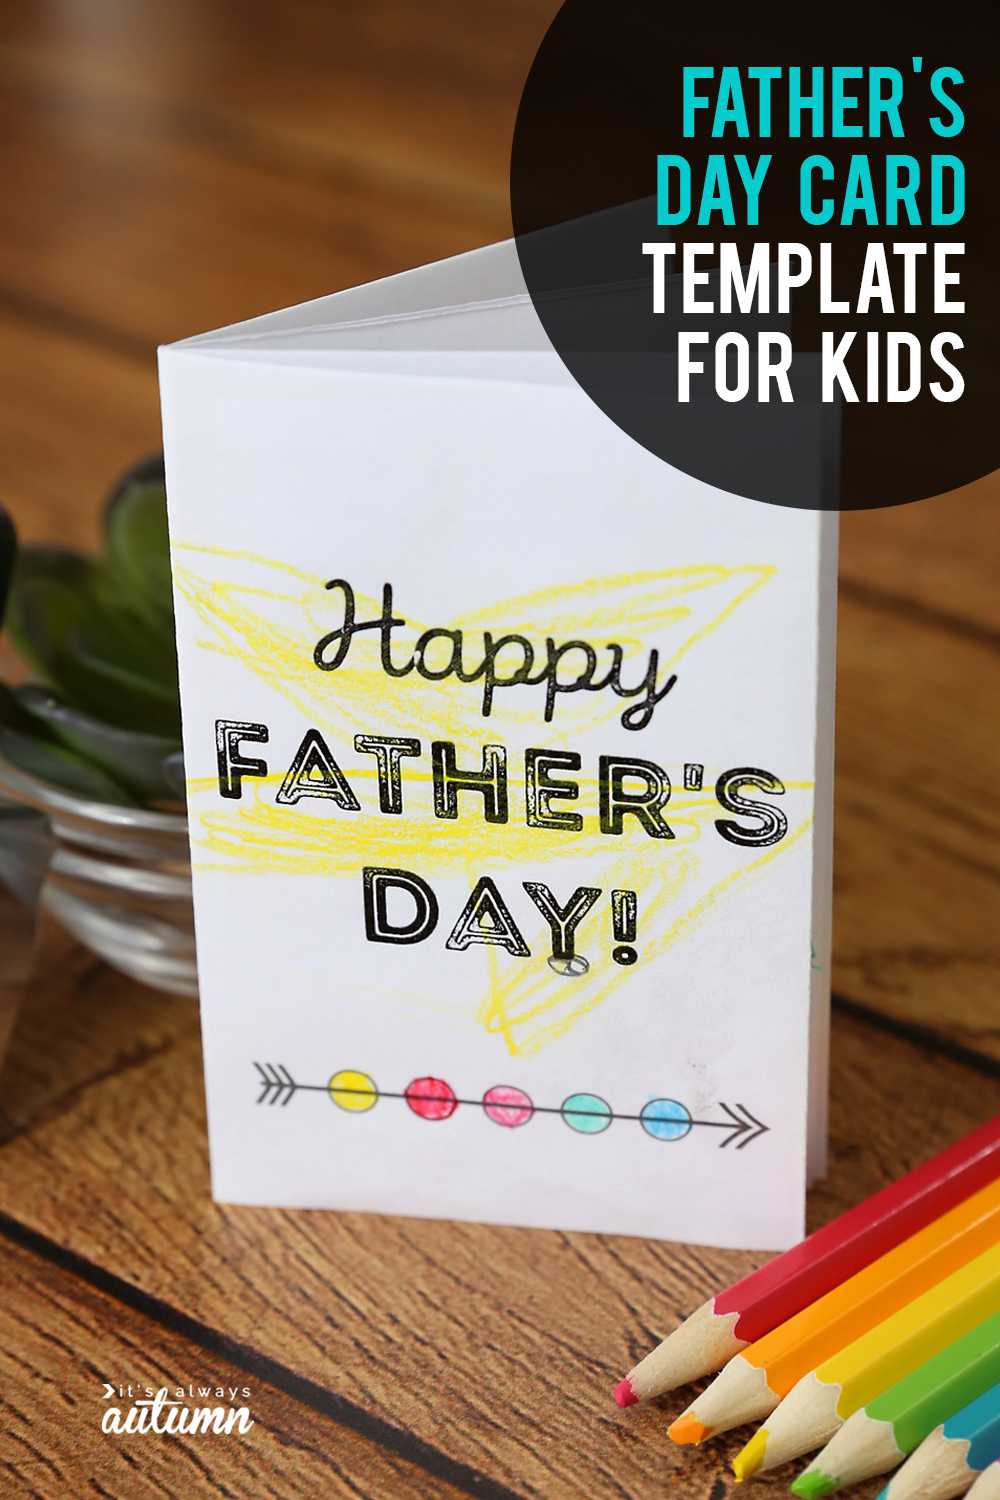 Adorable Printable Father's Day Card For Kids To Color Intended For Fathers Day Card Template